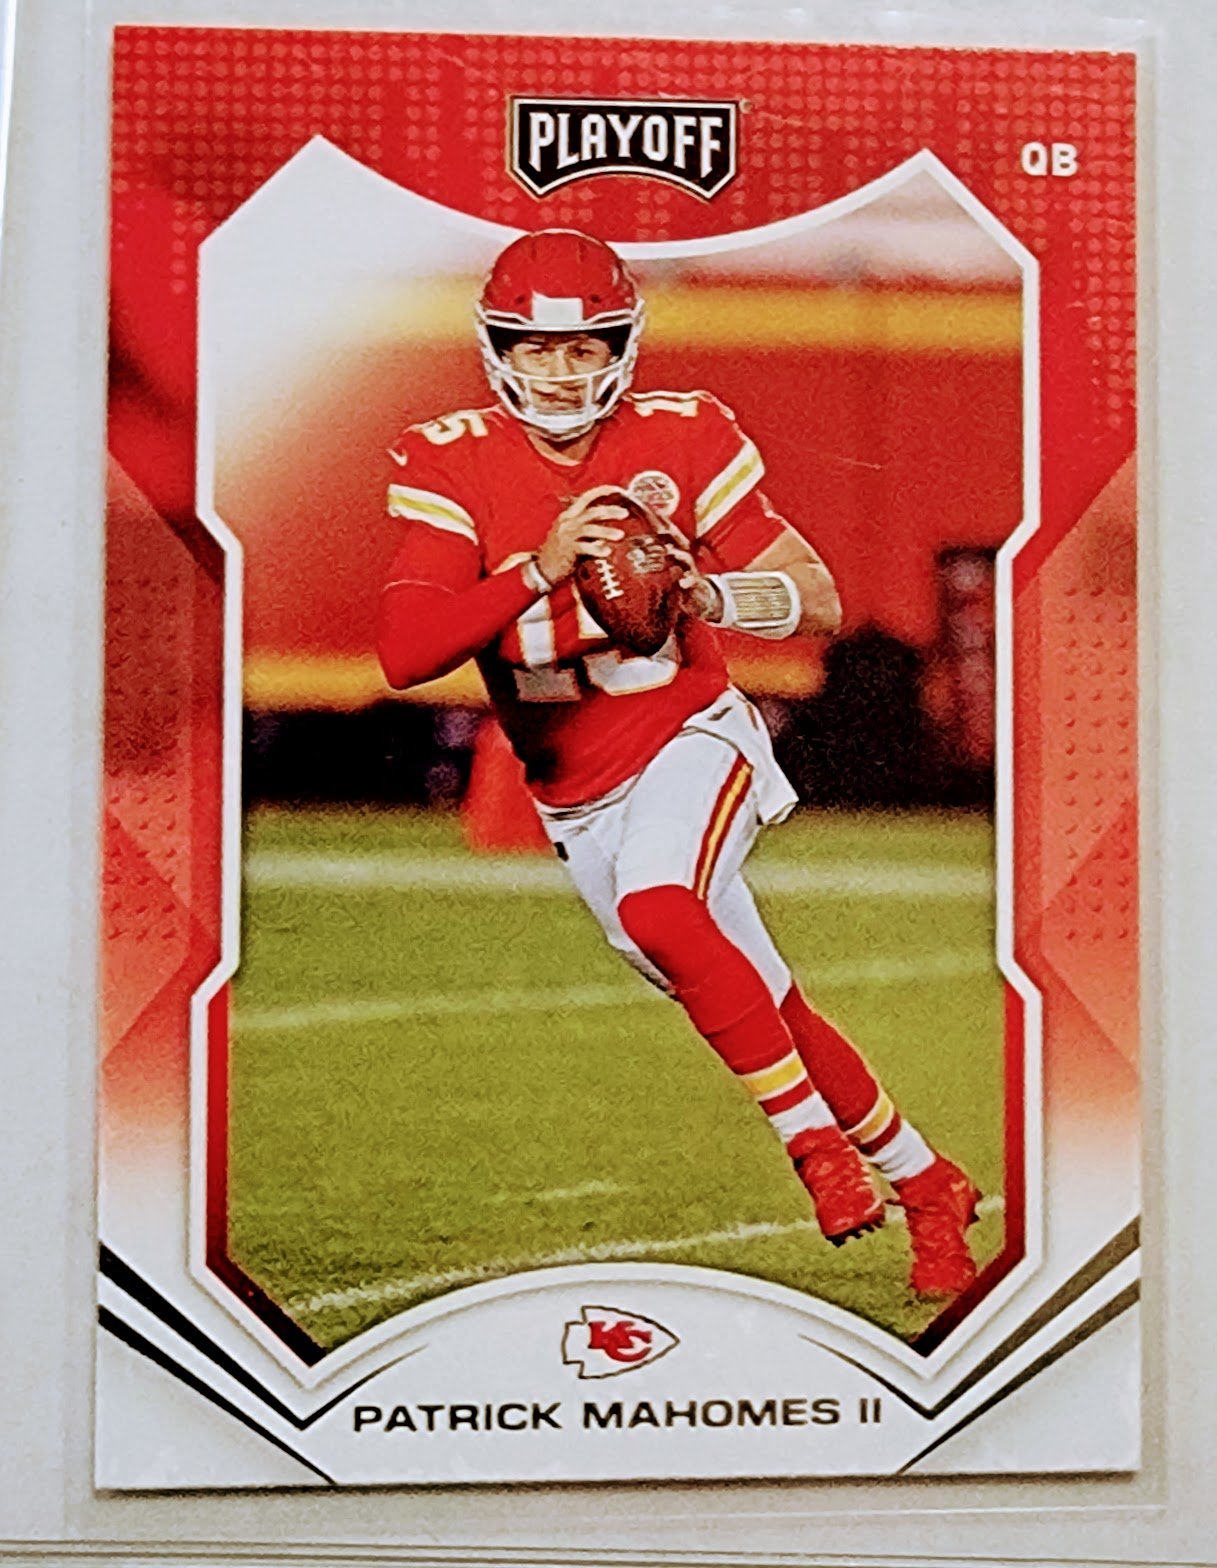 2021 Panini Playoff Patrick Mahomes II Football Card AVM1 simple Xclusive Collectibles   